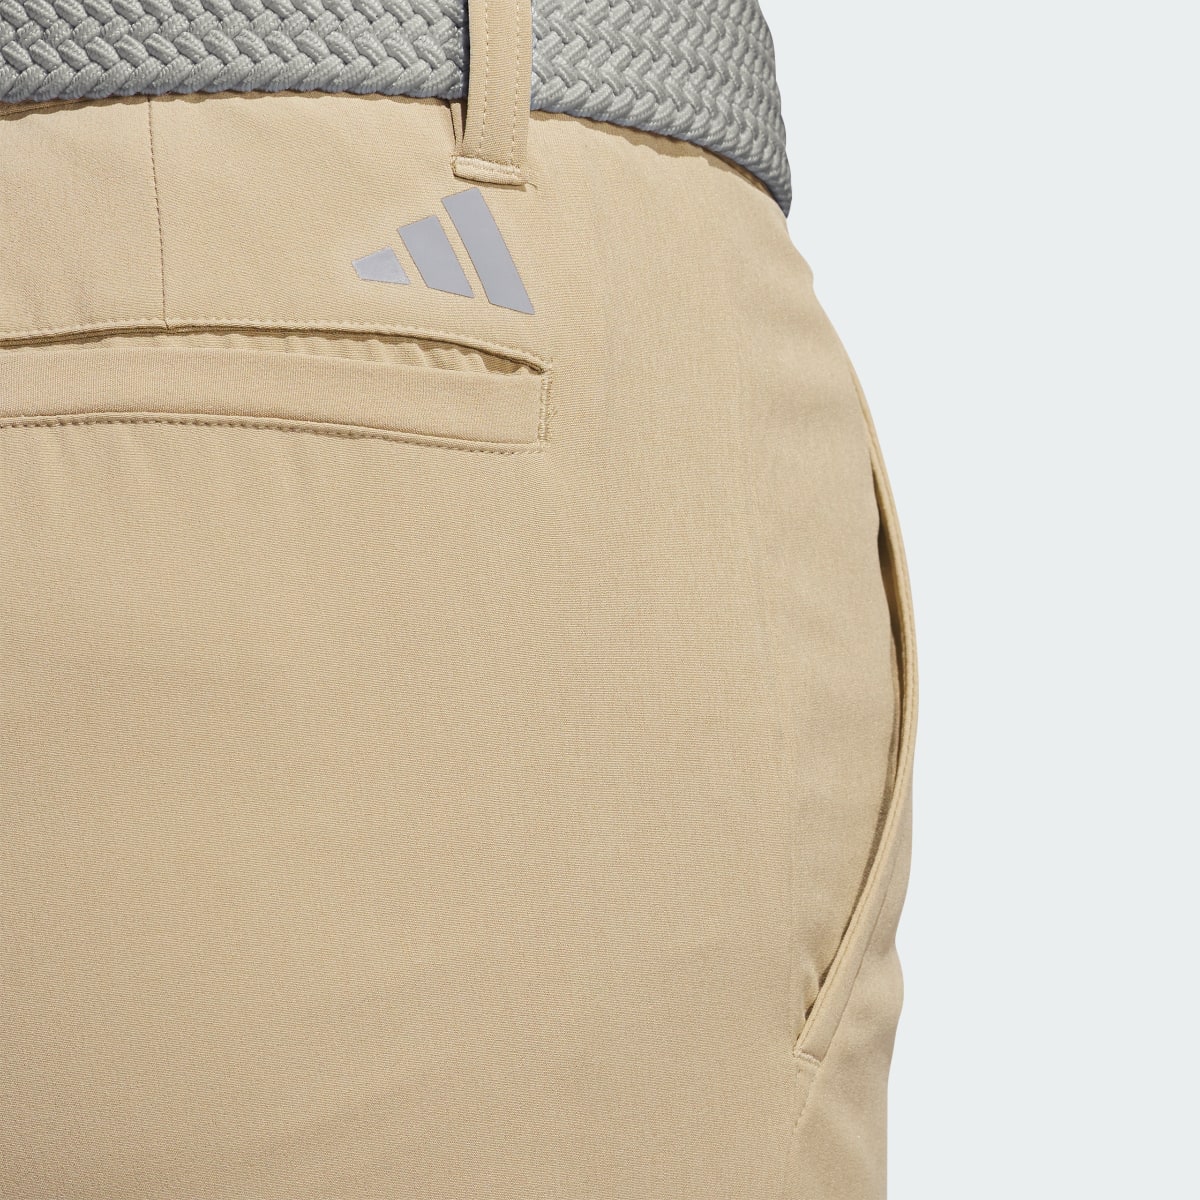 Adidas Ultimate365 Tapered Golf Trousers. 5